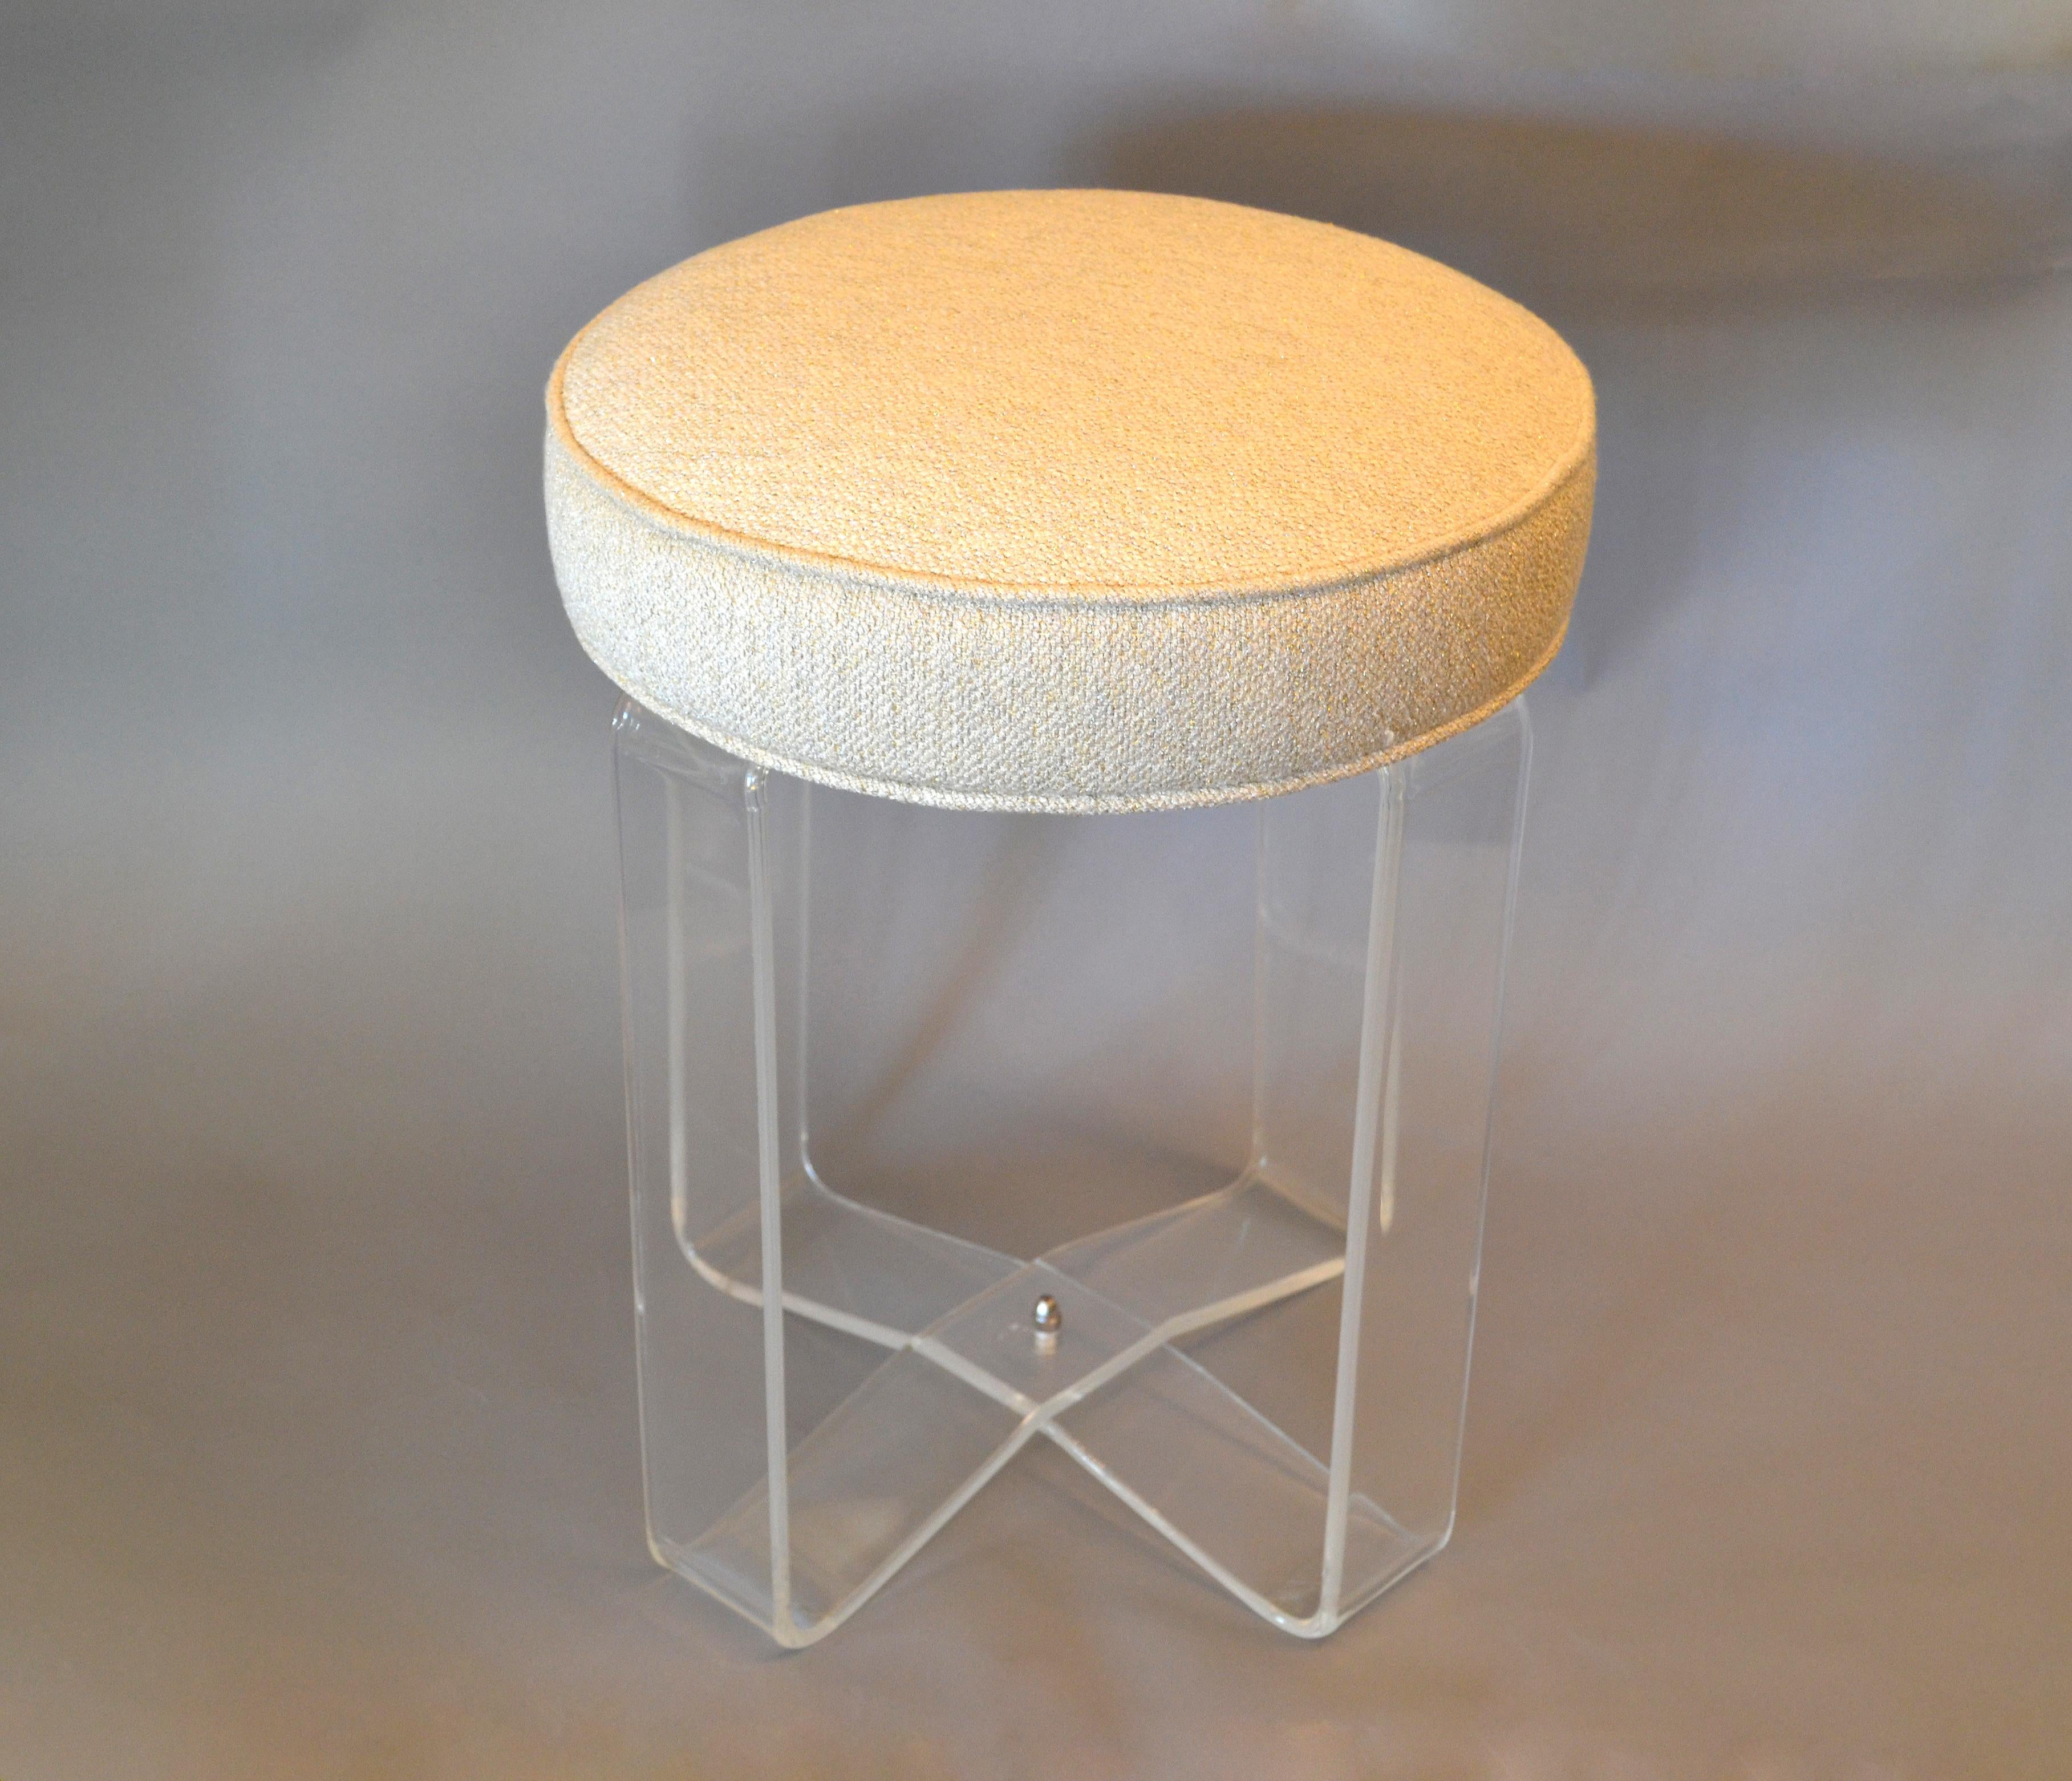 American Hollywood Regency Round Lucite Stool Crissed-Cross Legs and Fabric Seat